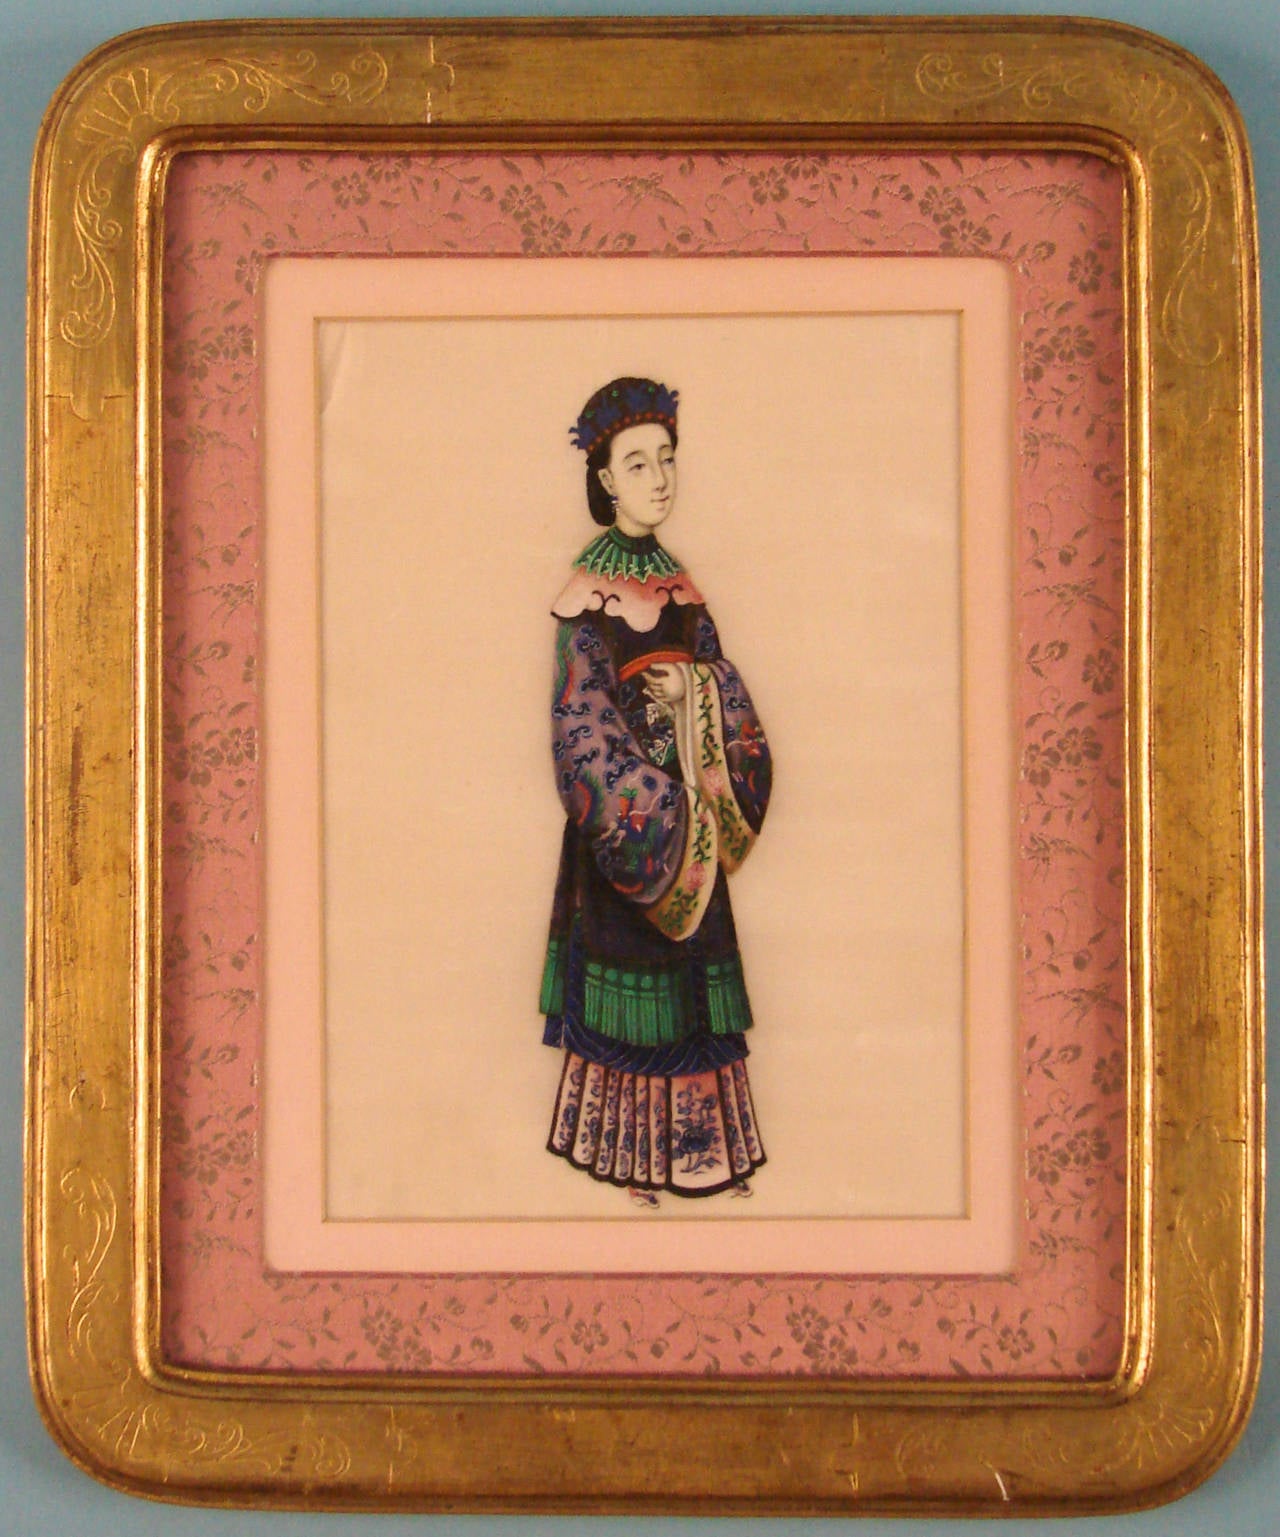 A pair of Chinese export paintings on pith paper depicting a noble man and woman in elegant court attire, circa 1900. Framed.